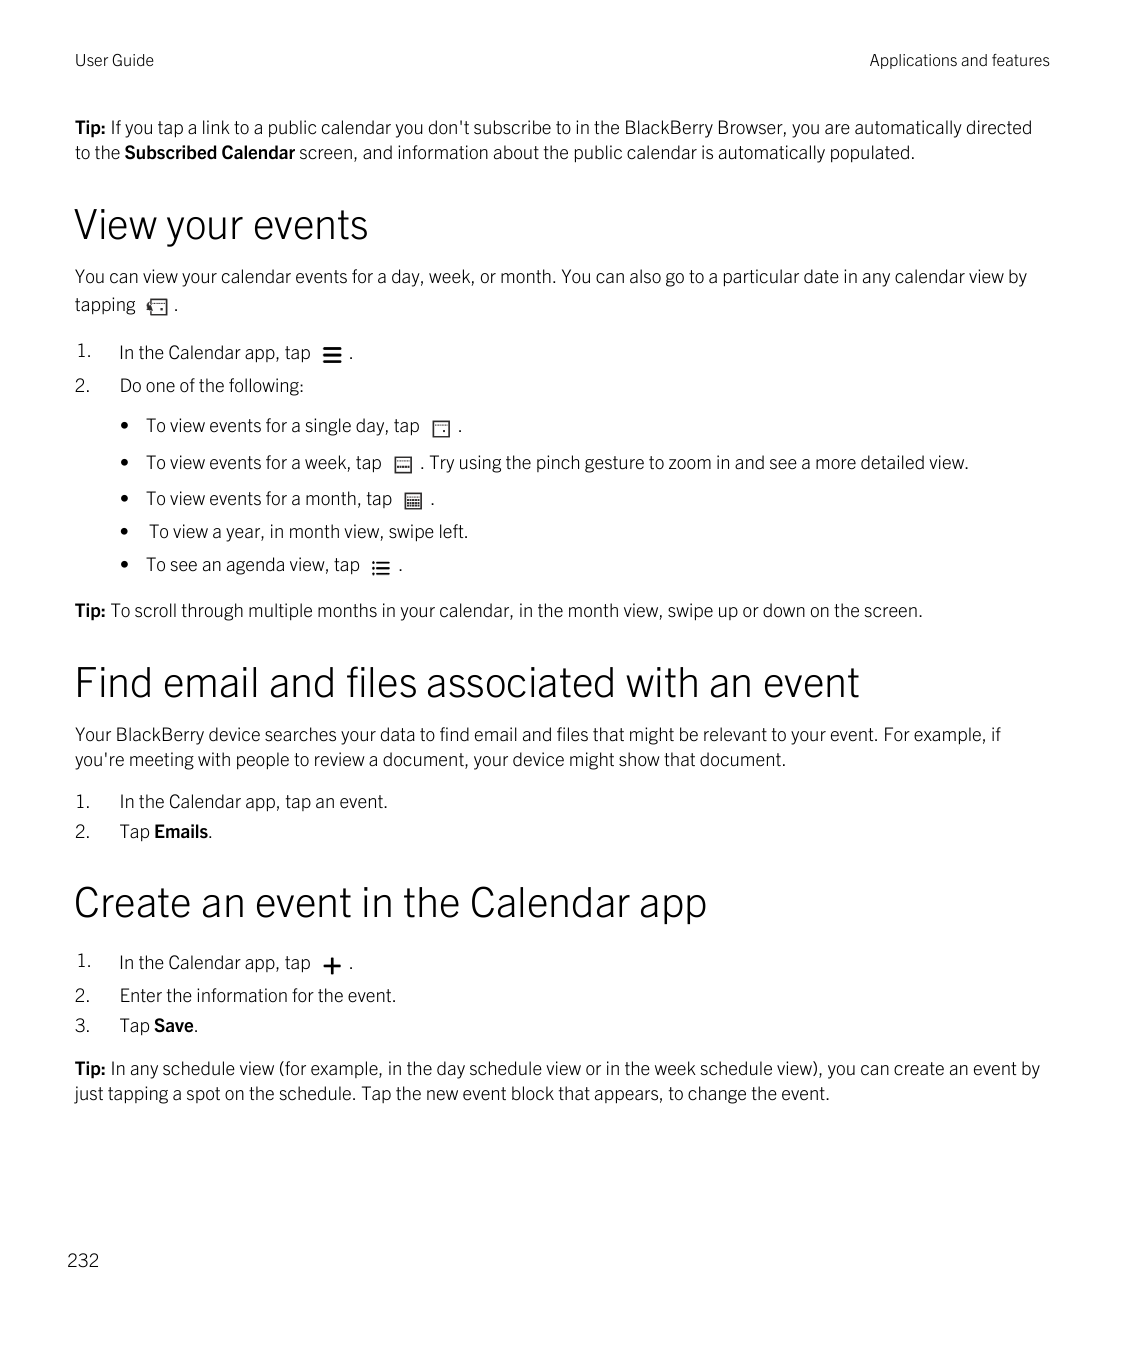 User GuideApplications and featuresTip: If you tap a link to a public calendar you don't subscribe to in the BlackBerry Browser,